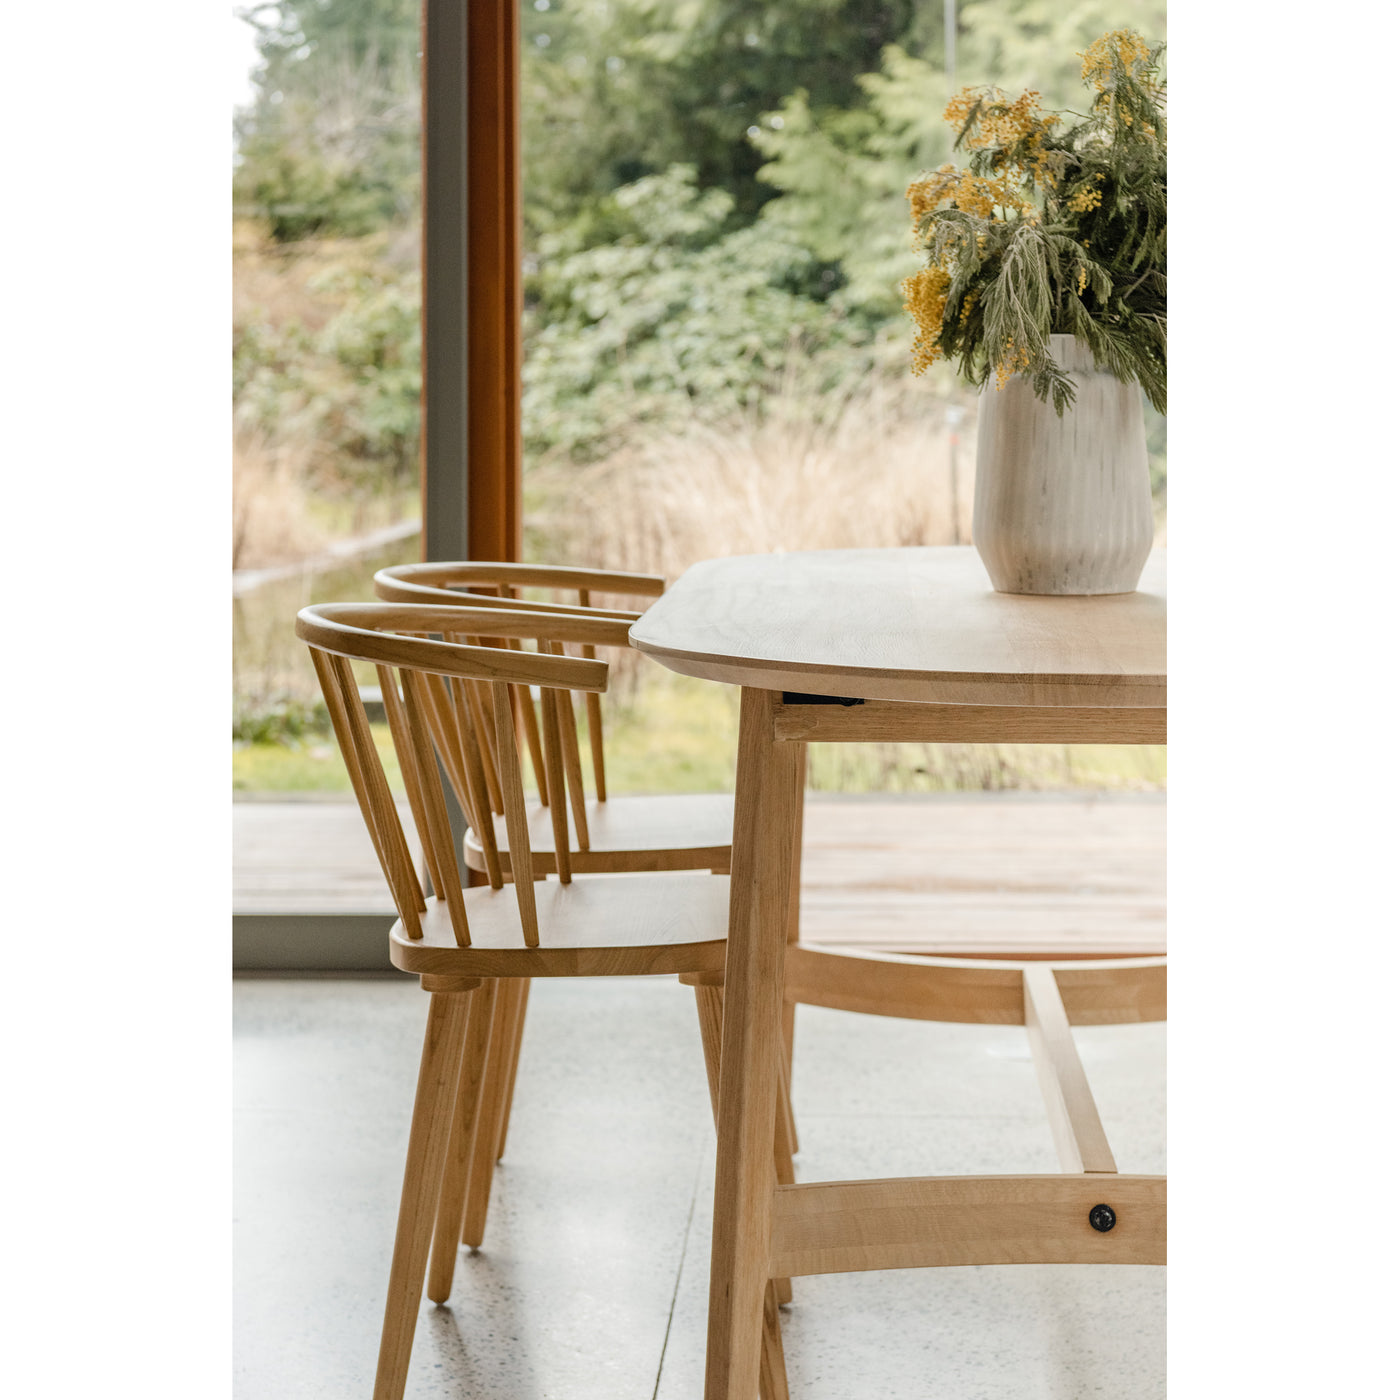 A quiet appreciation of style balanced with function. Our Norman dining chair design is a true dining delight with its cla...